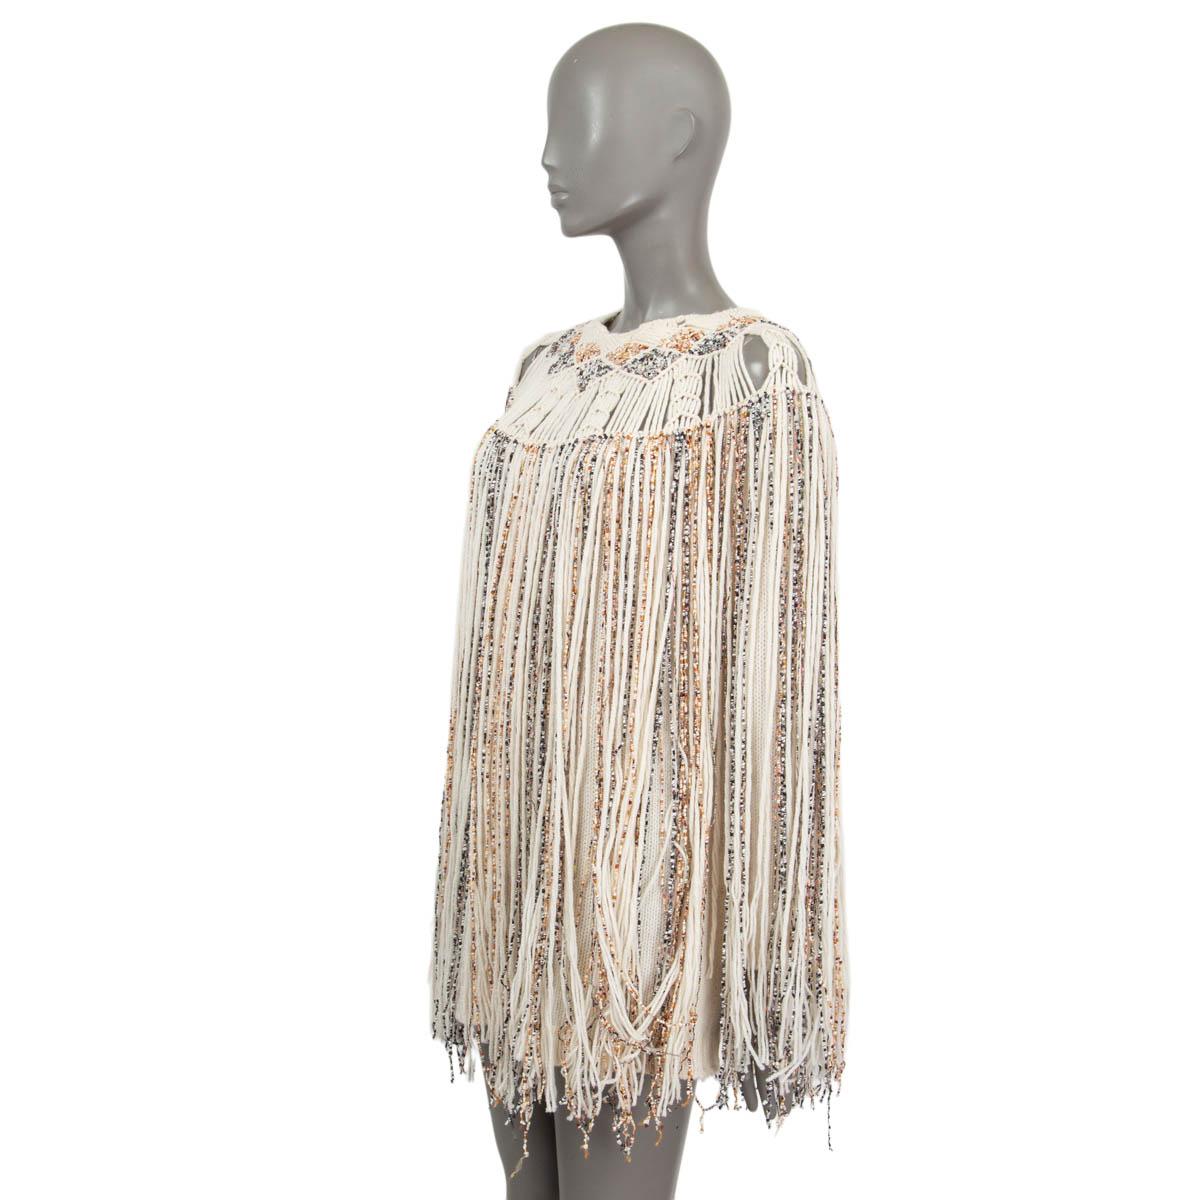 CHRISTIAN DIOR off-white cashmere 2018 FRINGED KNIT Dress 38 S 1